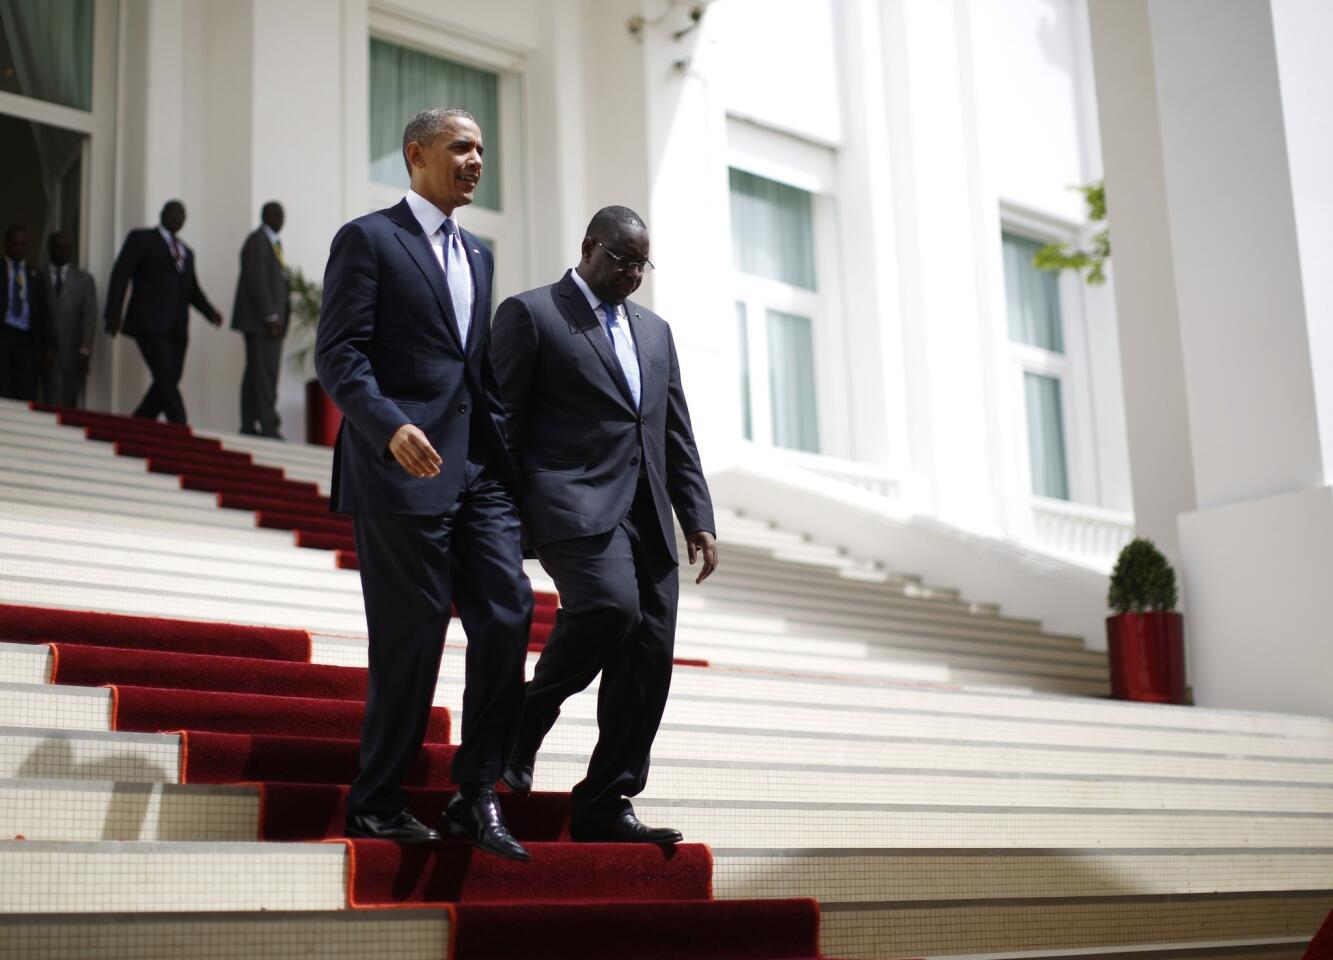 U.S. President Obama arrives at a joint press conference with Senegal's President \Sall at the Presidential Palace in Dakar